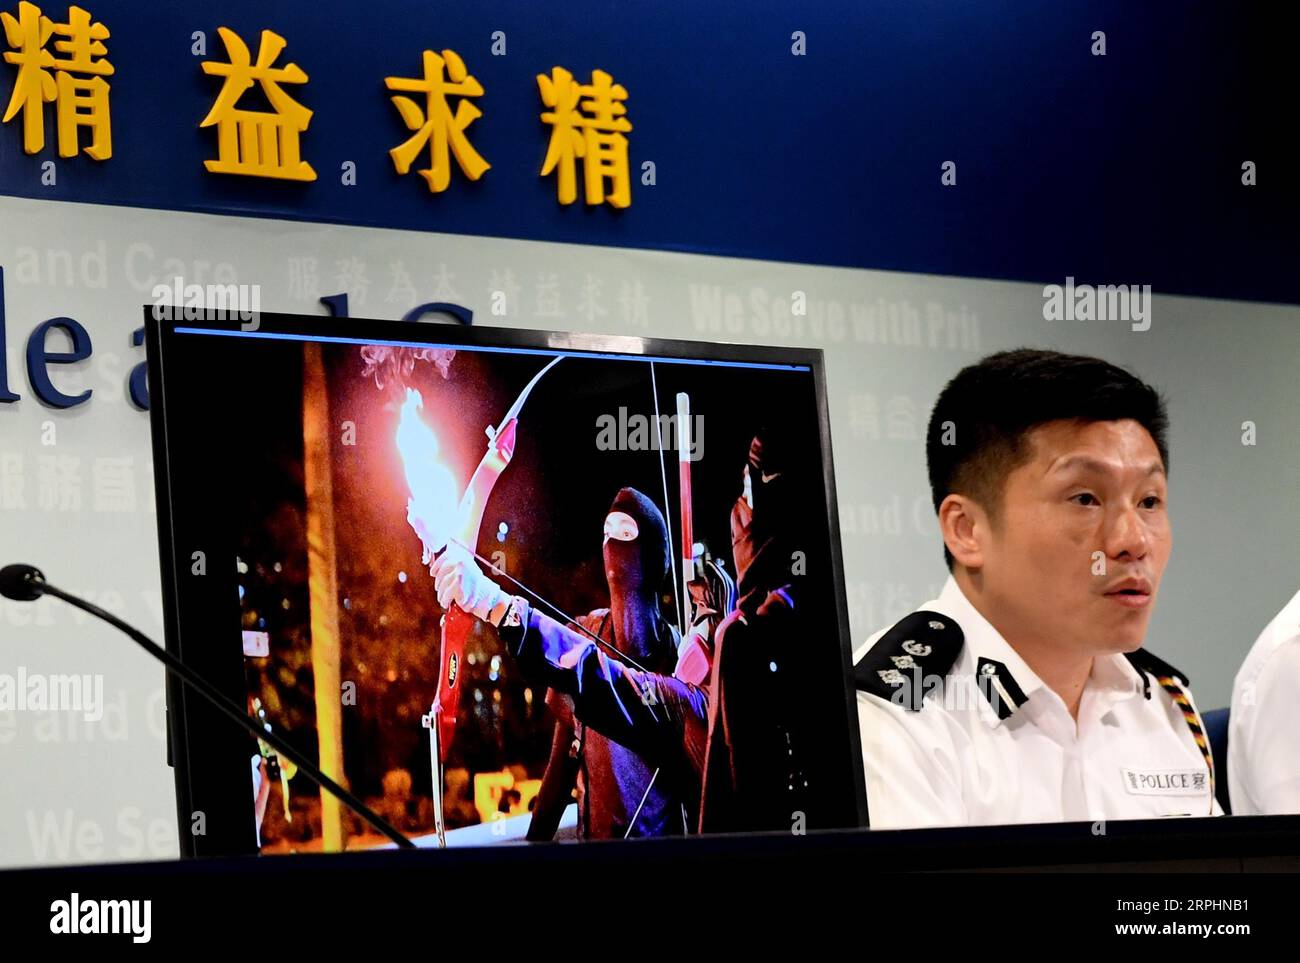 Hongkong, Pressekonferenz der Polizei 191114 -- HONG KONG, Nov. 14, 2019 -- Chief Superintendent of Police Public Relations Branch Tse Chun-chung shows an evidence image of violent acts by rioters at a press conference in Hong Kong, south China, Nov. 13, 2019. Universities in Hong Kong are by no means a lawless frontier, and the police are legally responsible for taking actions against any law-breaking activities, Tse Chun-chung said.  CHINA-HONG KONG-POLICE-PRESS CONFERENCE CN ZhuxXiang PUBLICATIONxNOTxINxCHN Stock Photo